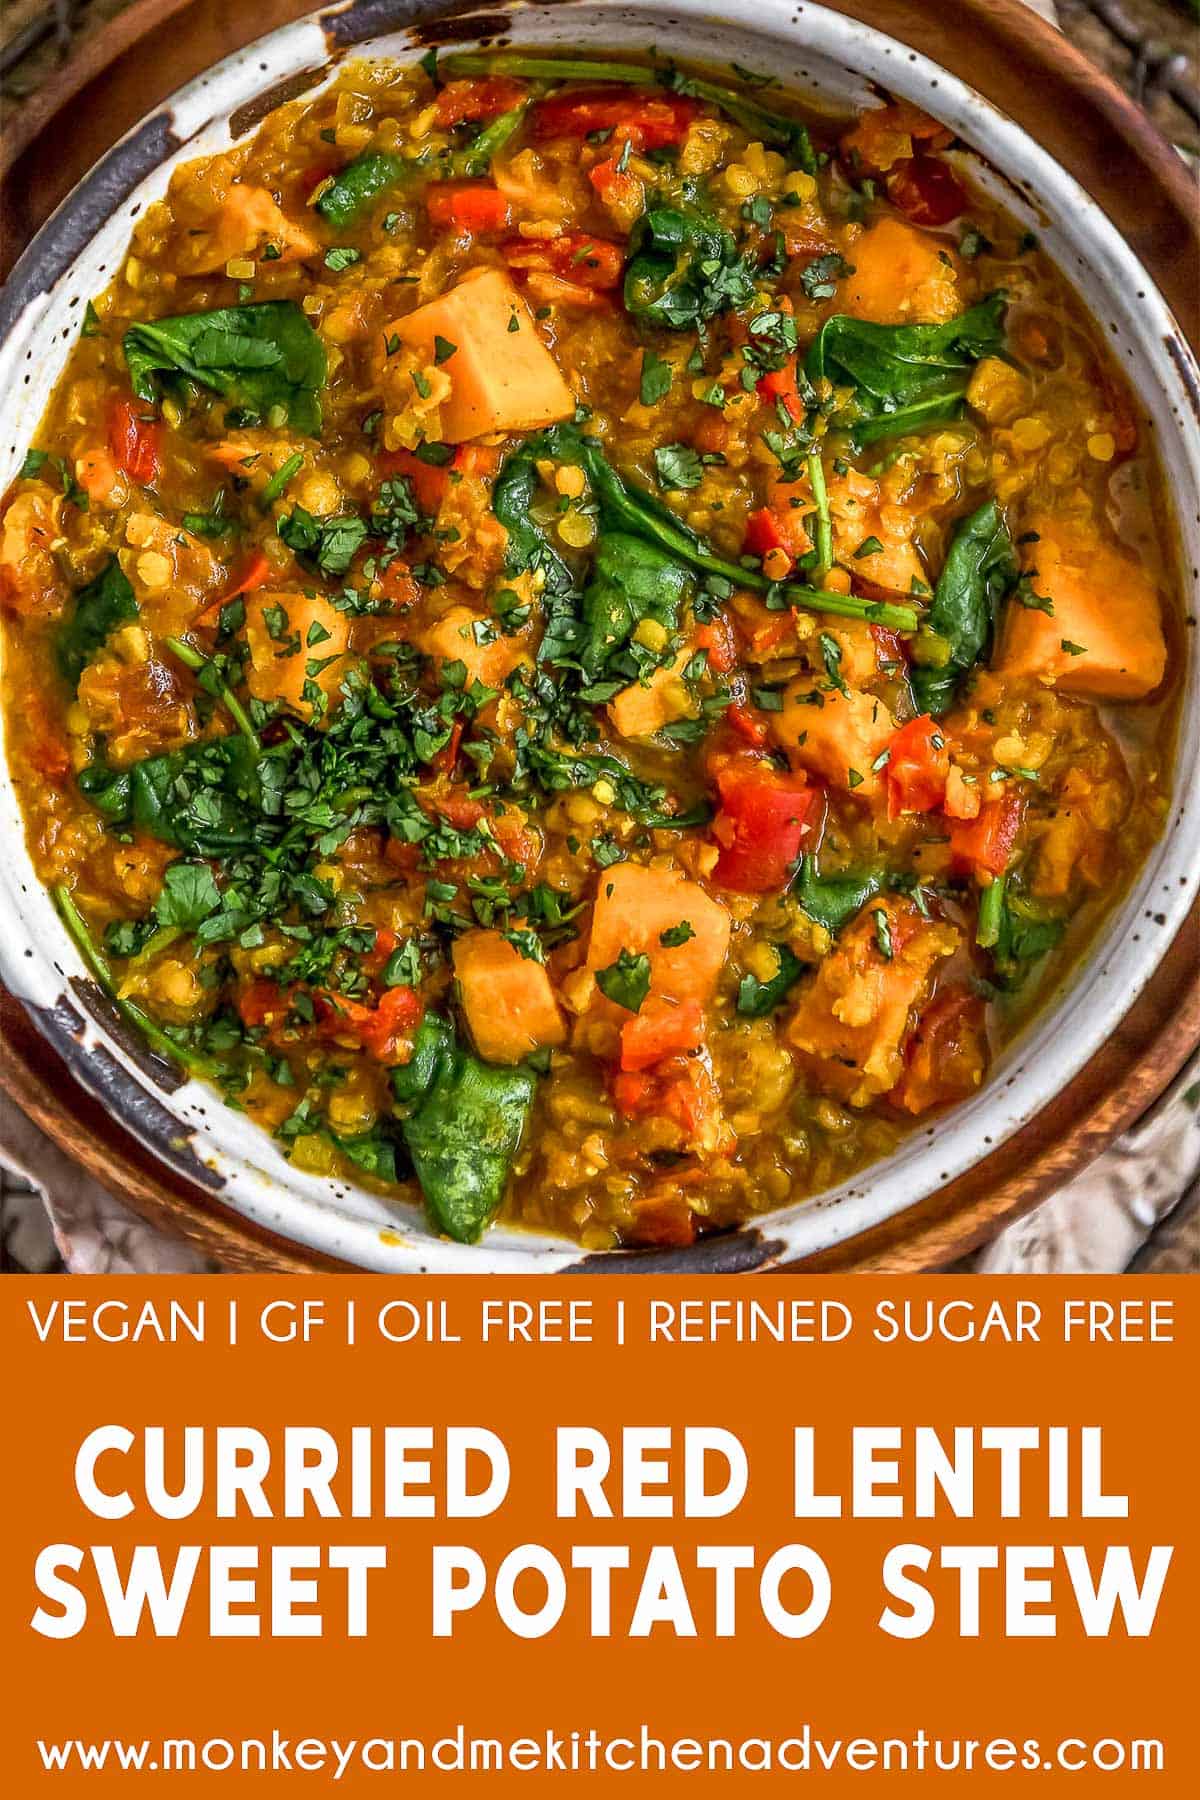 Curried Red Lentil and Sweet Potato Stew with Text Description